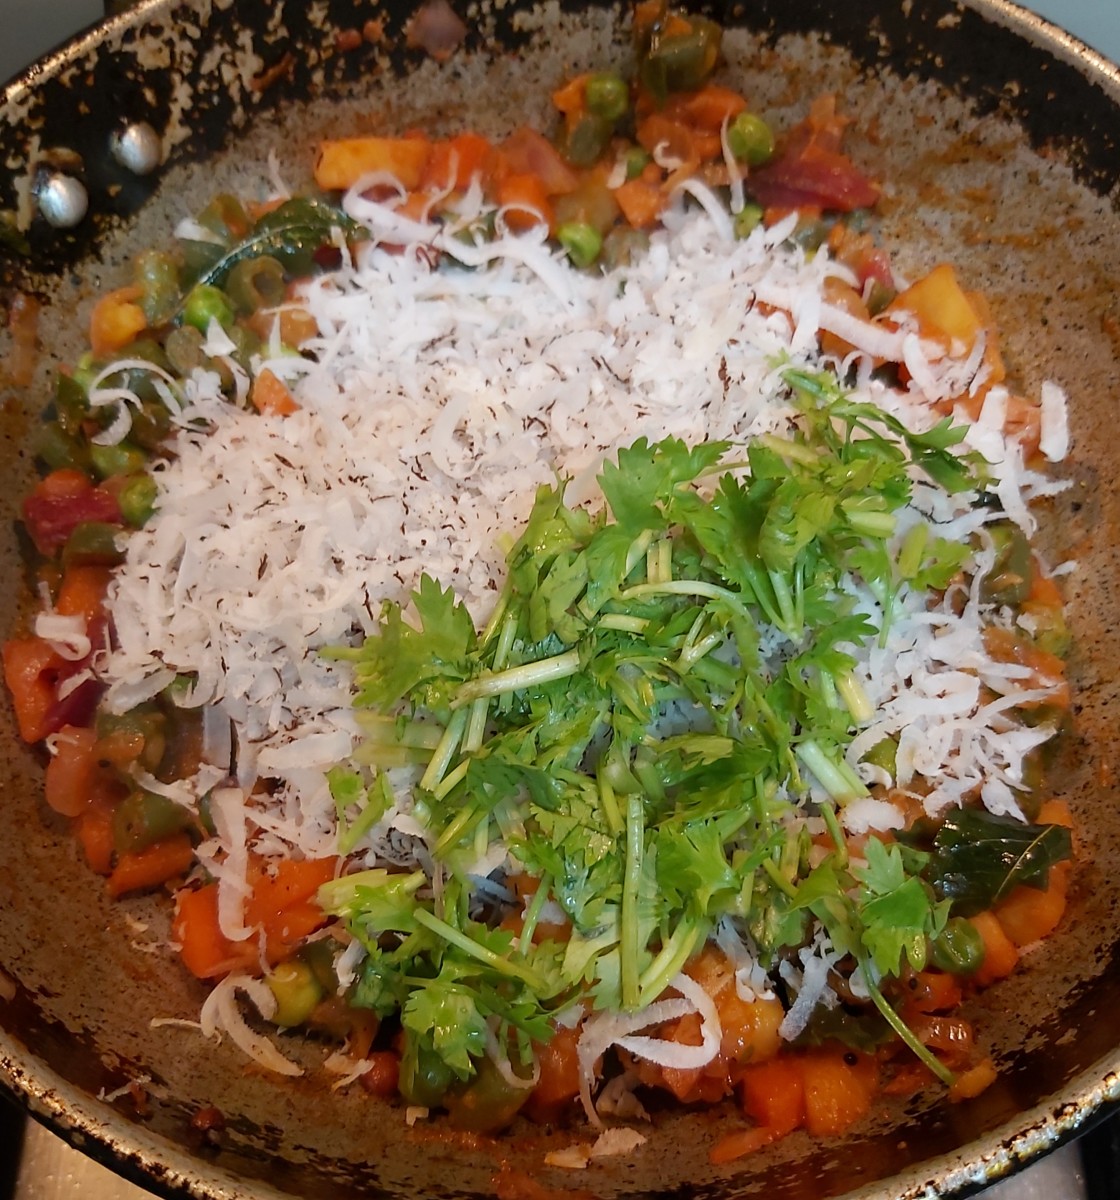 Add grated dry coconut and finely chopped coriander leaves.